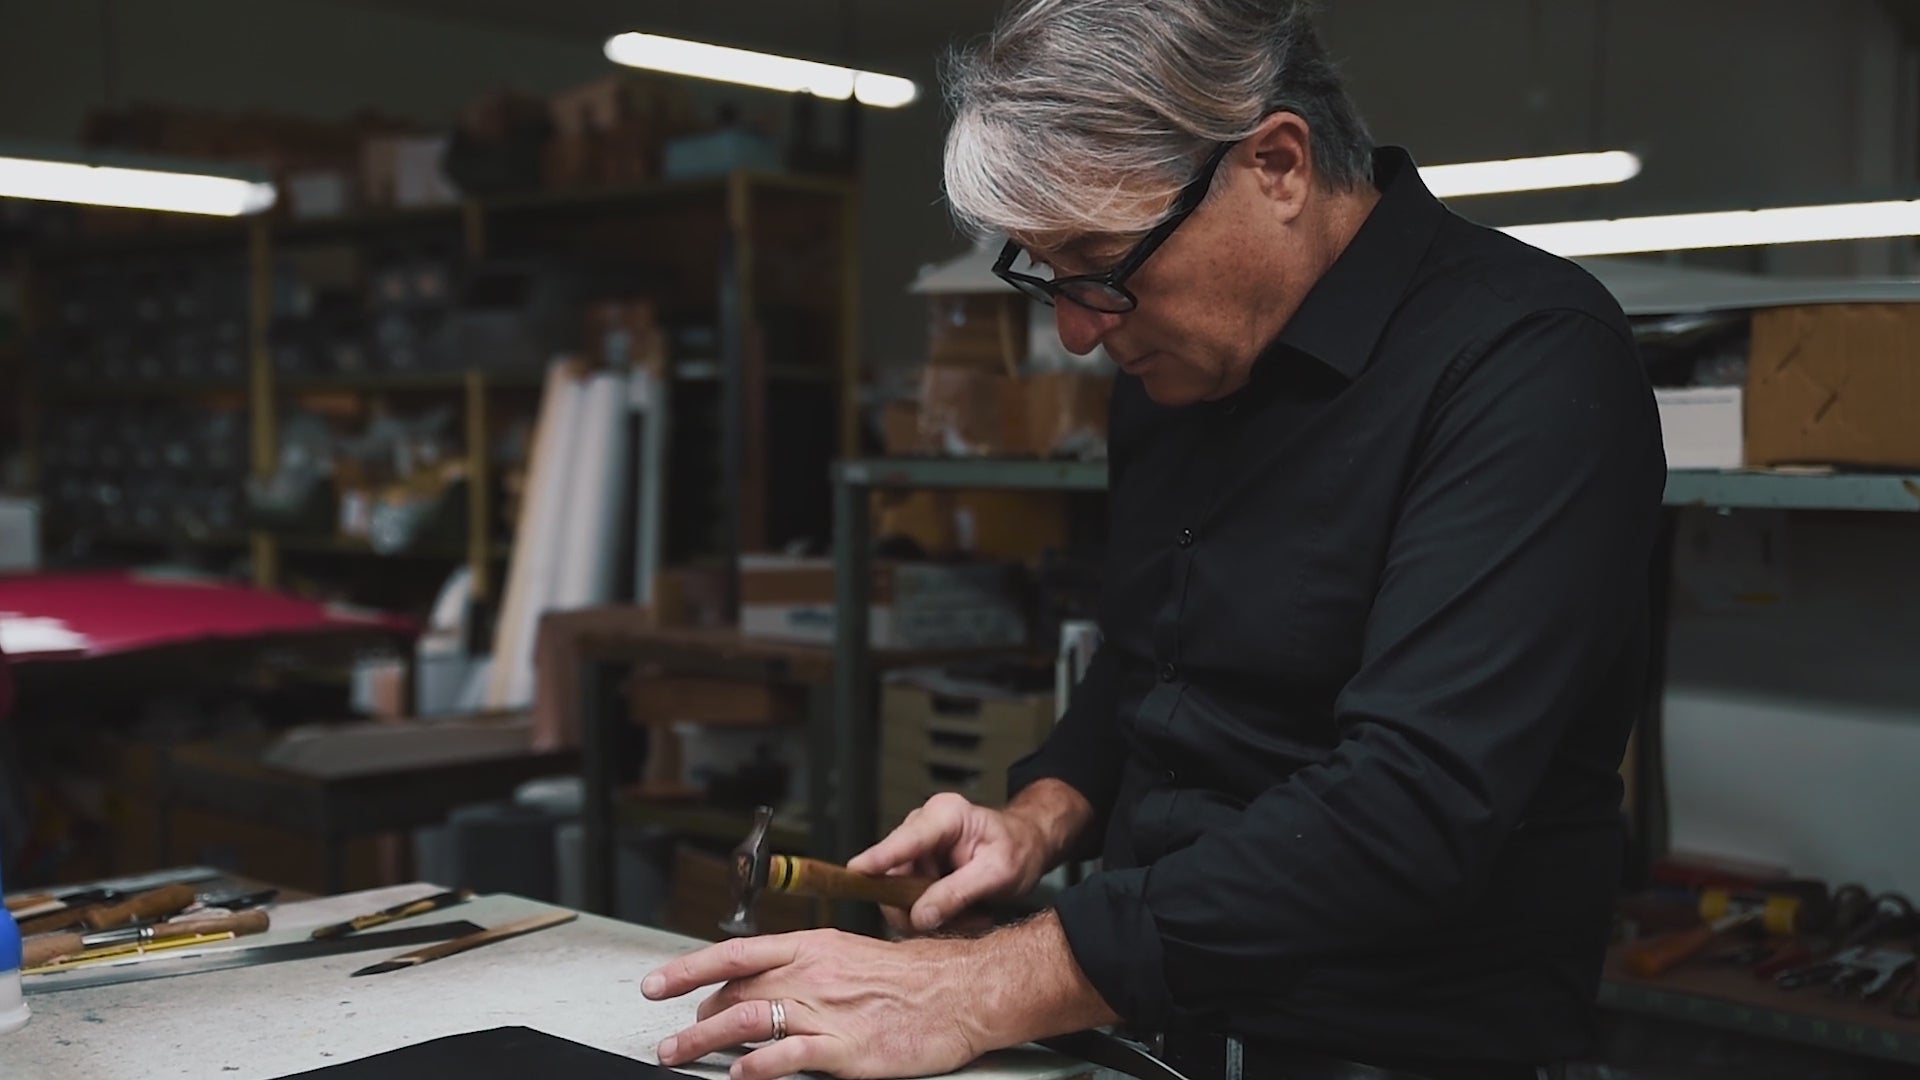 Load video: Chandra Keyser. How Bags are Made in Italy. Minimalist Style Bags. Sustainable Luxury Handcrafed by Master Italian craftsmen and craftswomen. 